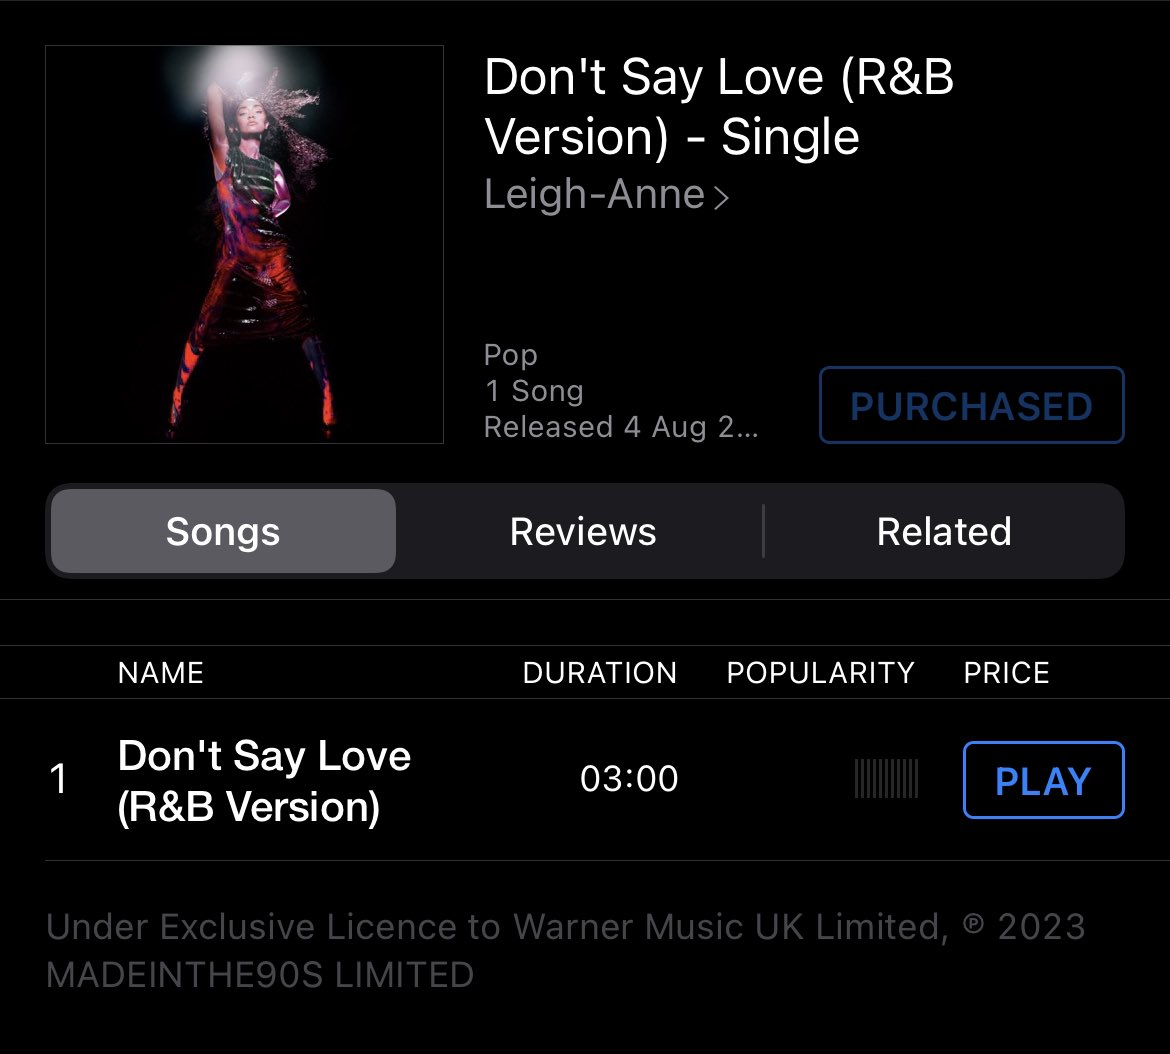 Bought the R&B version and you should do the same! 💅 #DontSayLove #LeighAnne